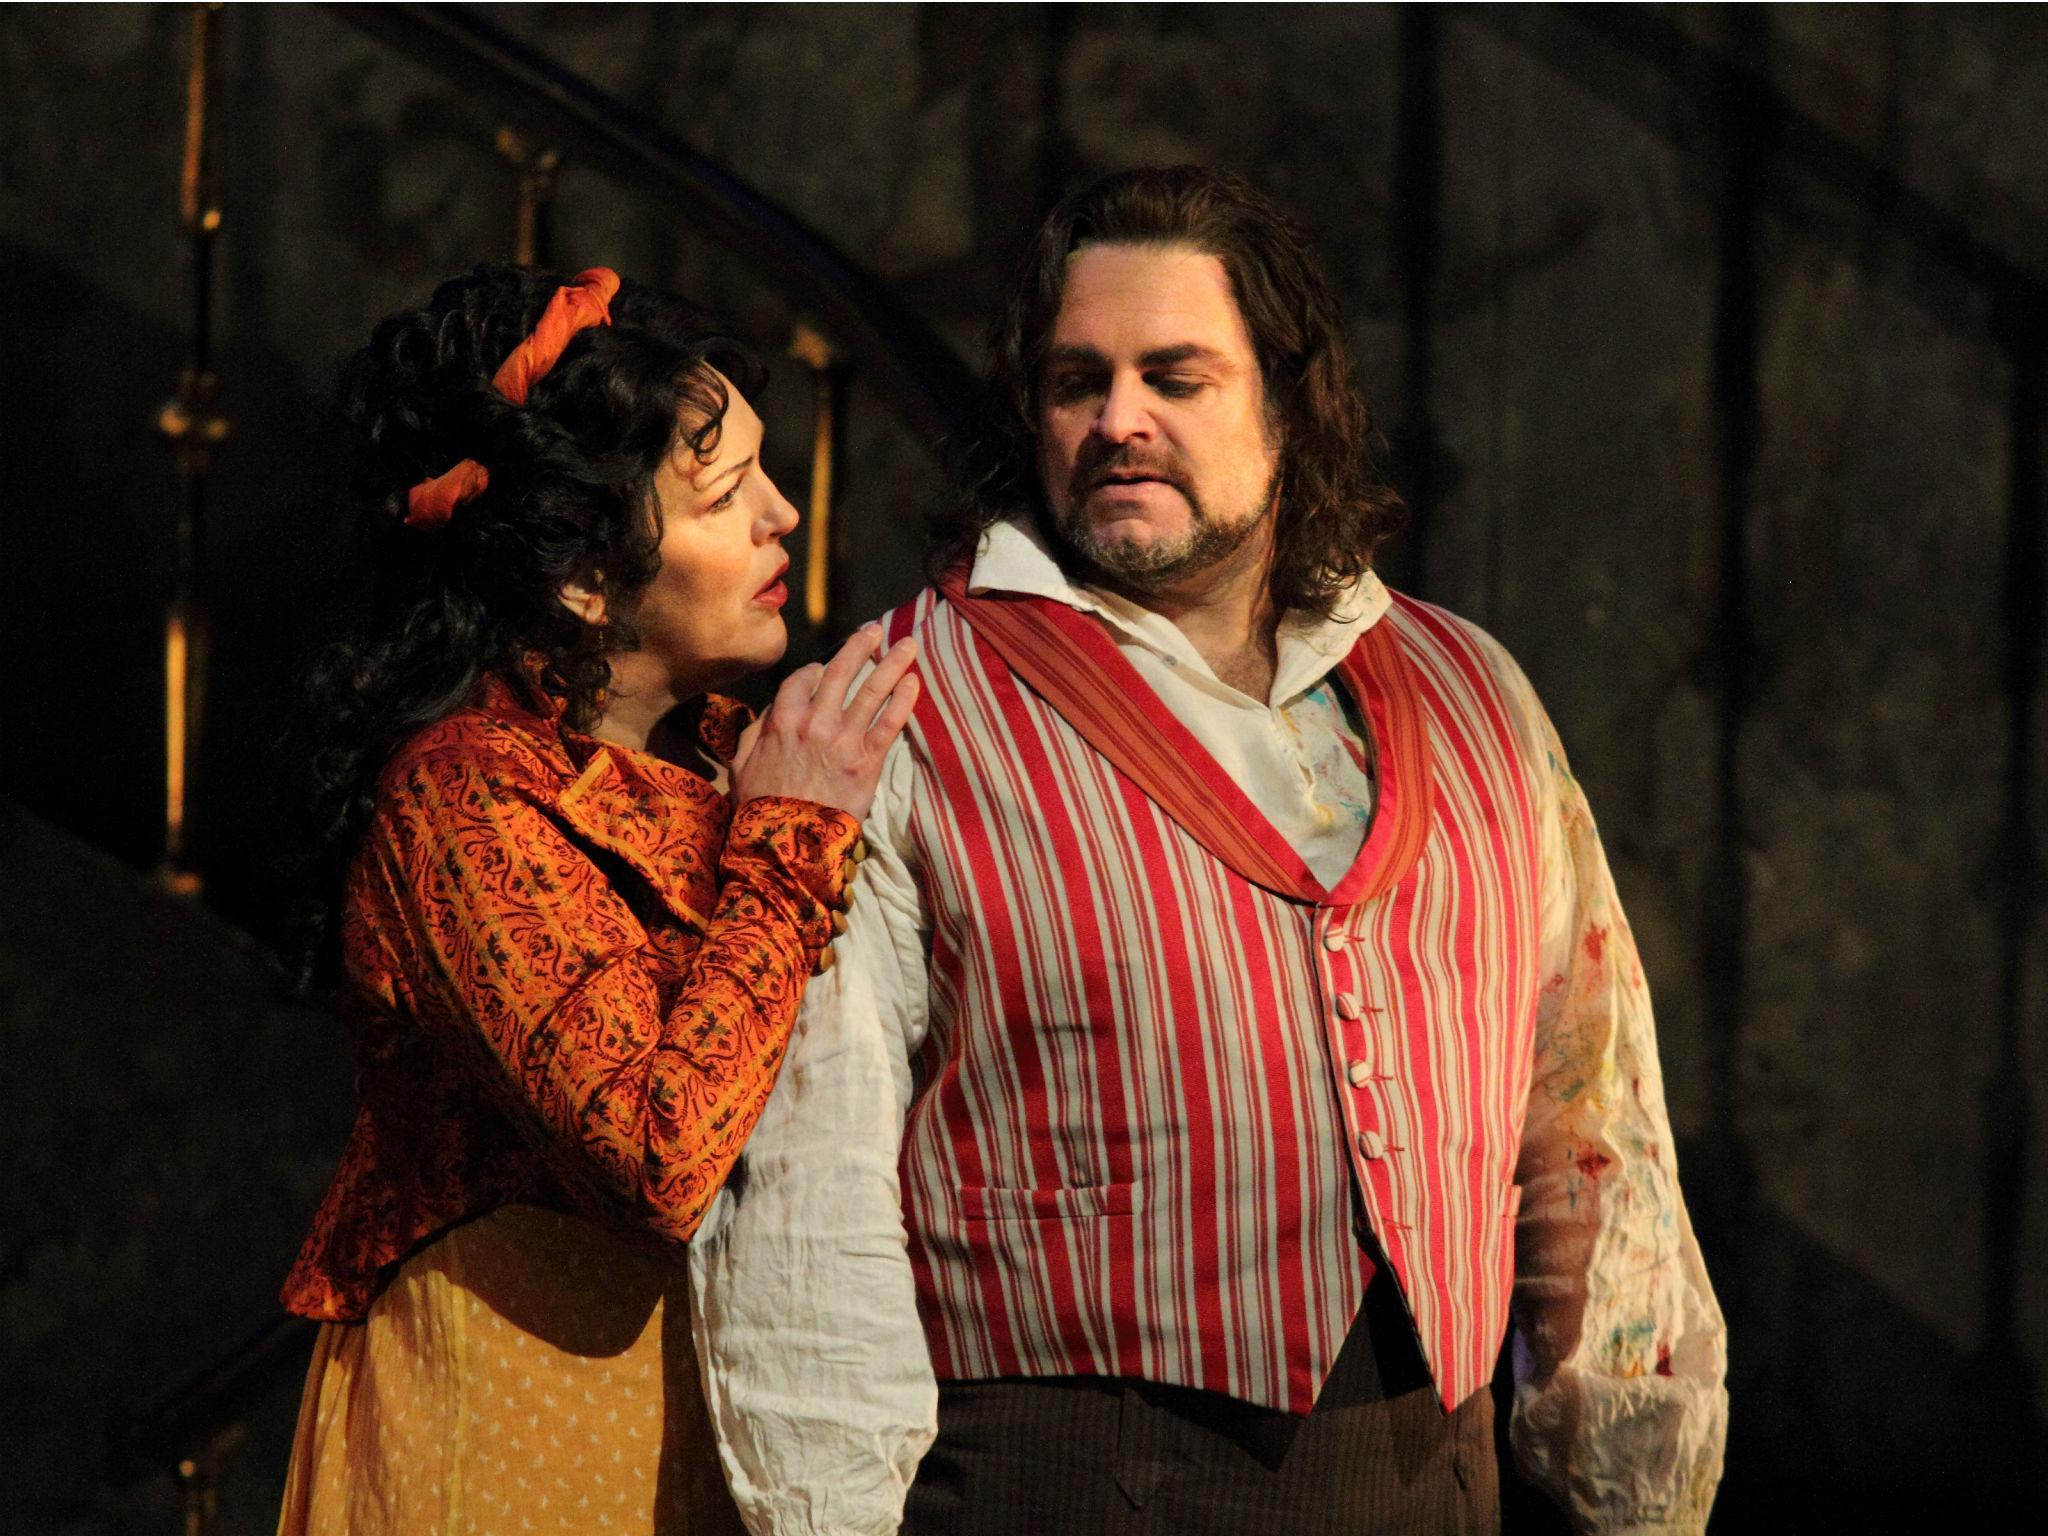 Adrianne Pieczonka and Joseph Calleja star in this latest production of Puccini’s classic